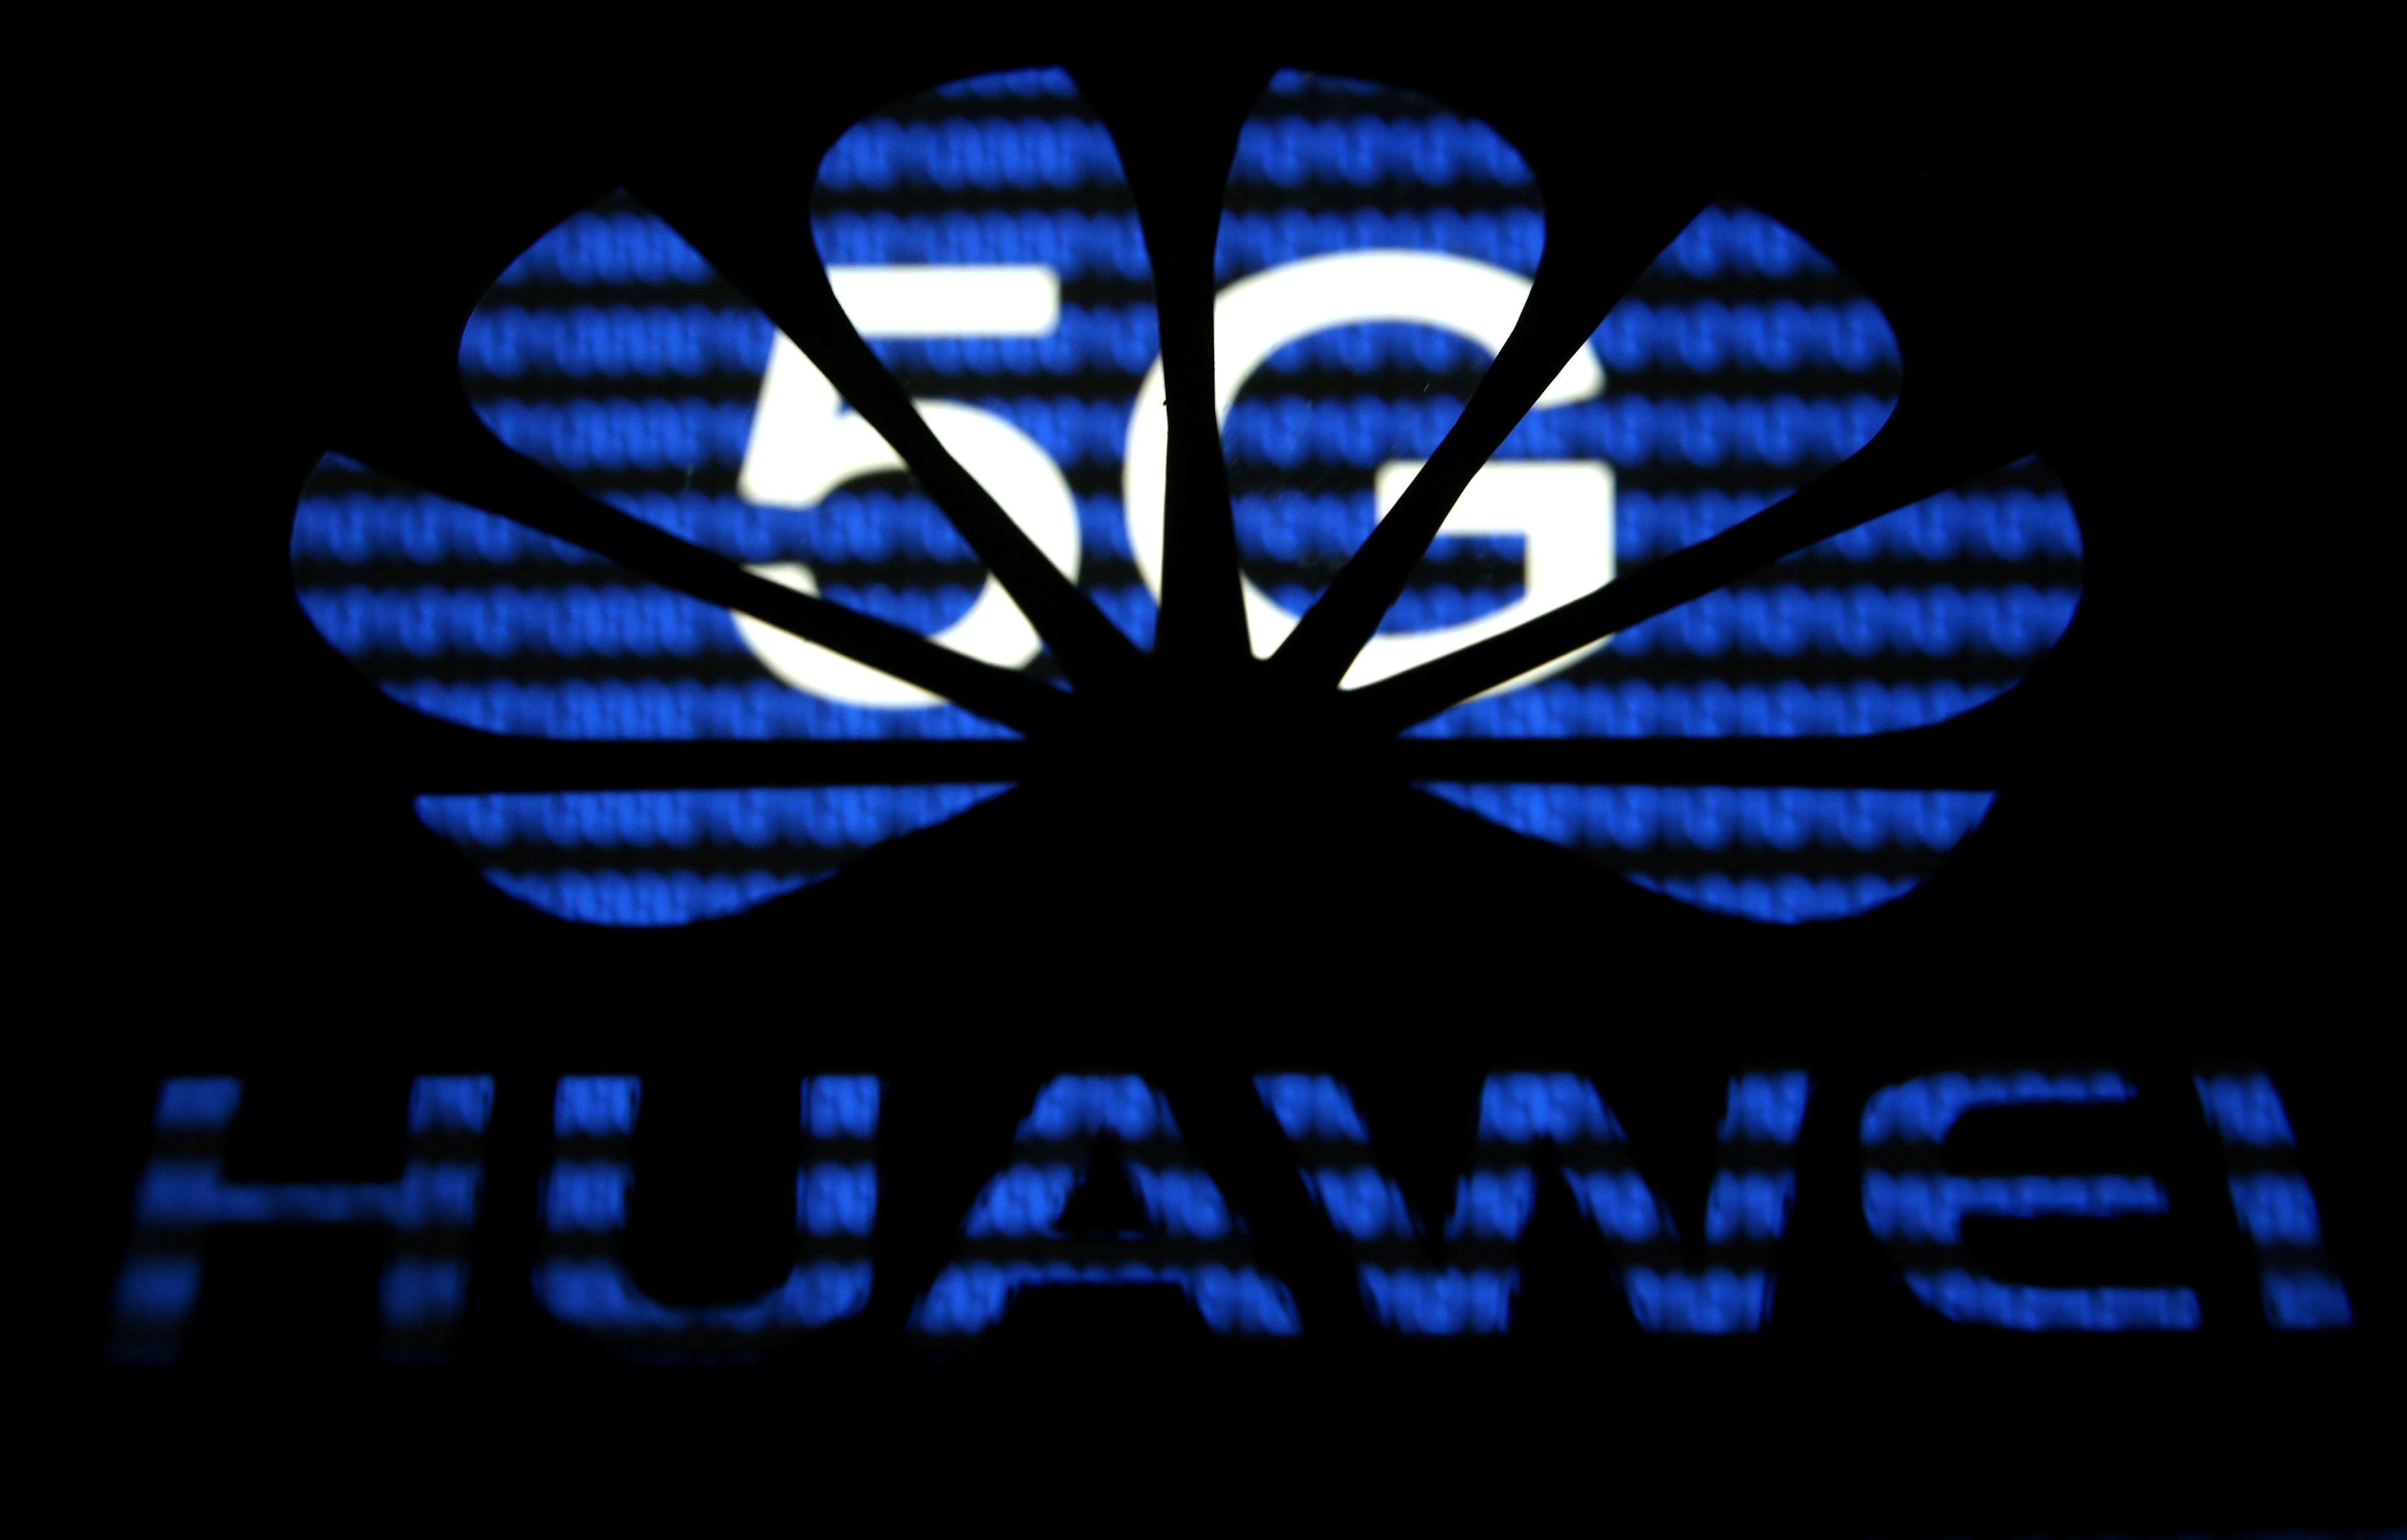 A 3-D printed Huawei logo is seen in front of displayed 5G words in this illustration taken February 12, 2019. u00e2u20acu201d Reuters pic